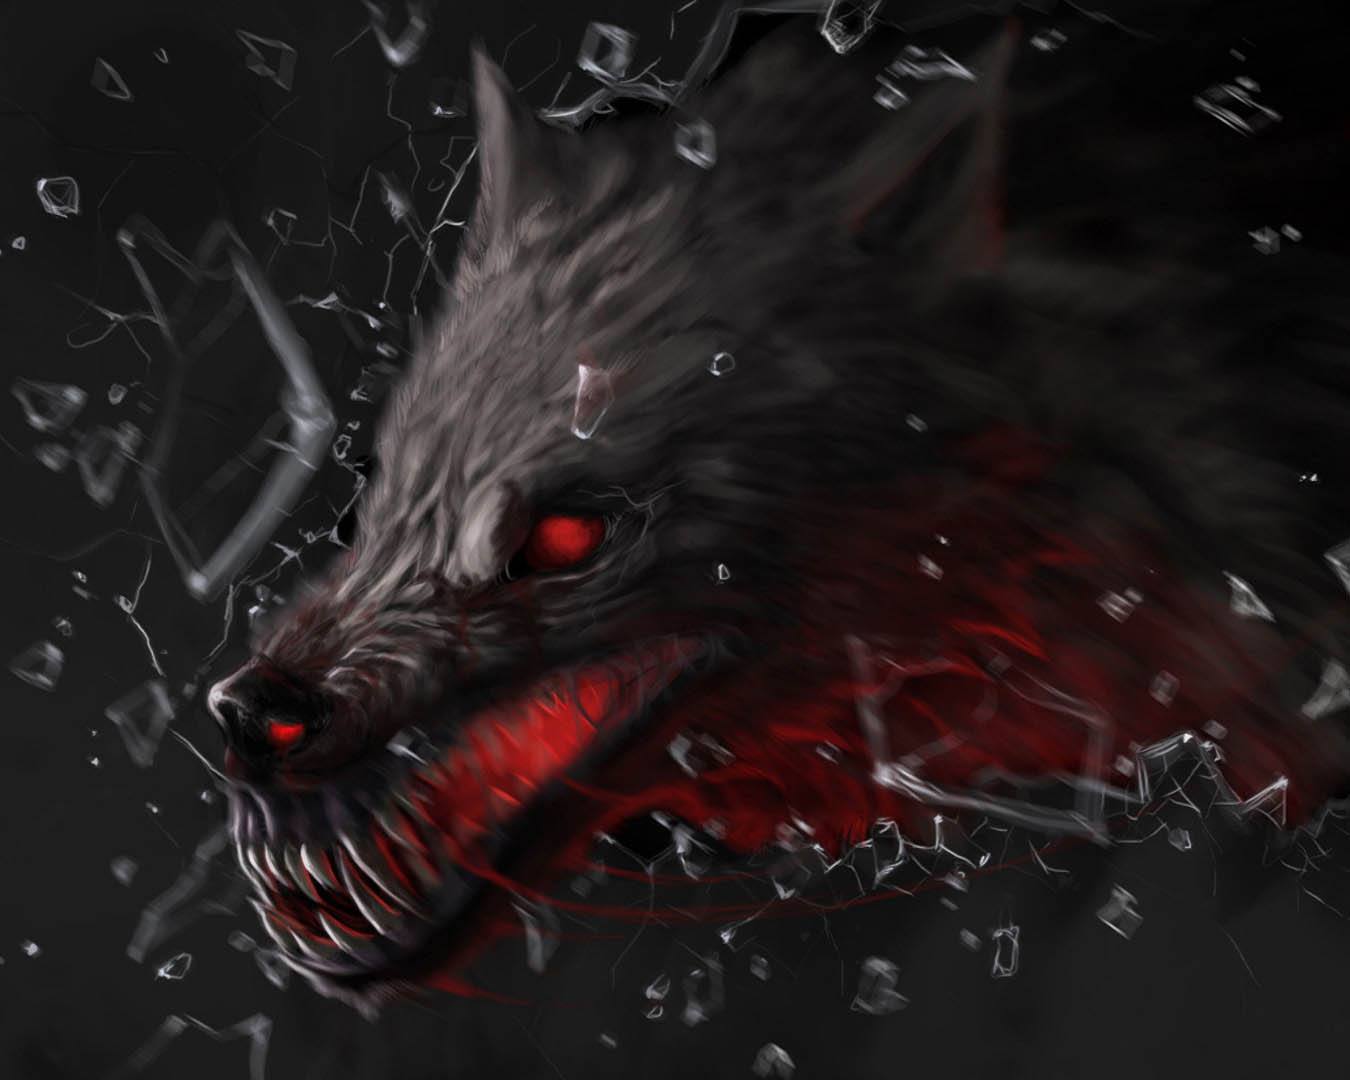 wolf wallpapers tumblr Cartoon In Armor Dark Wallpaper Scary Wolf